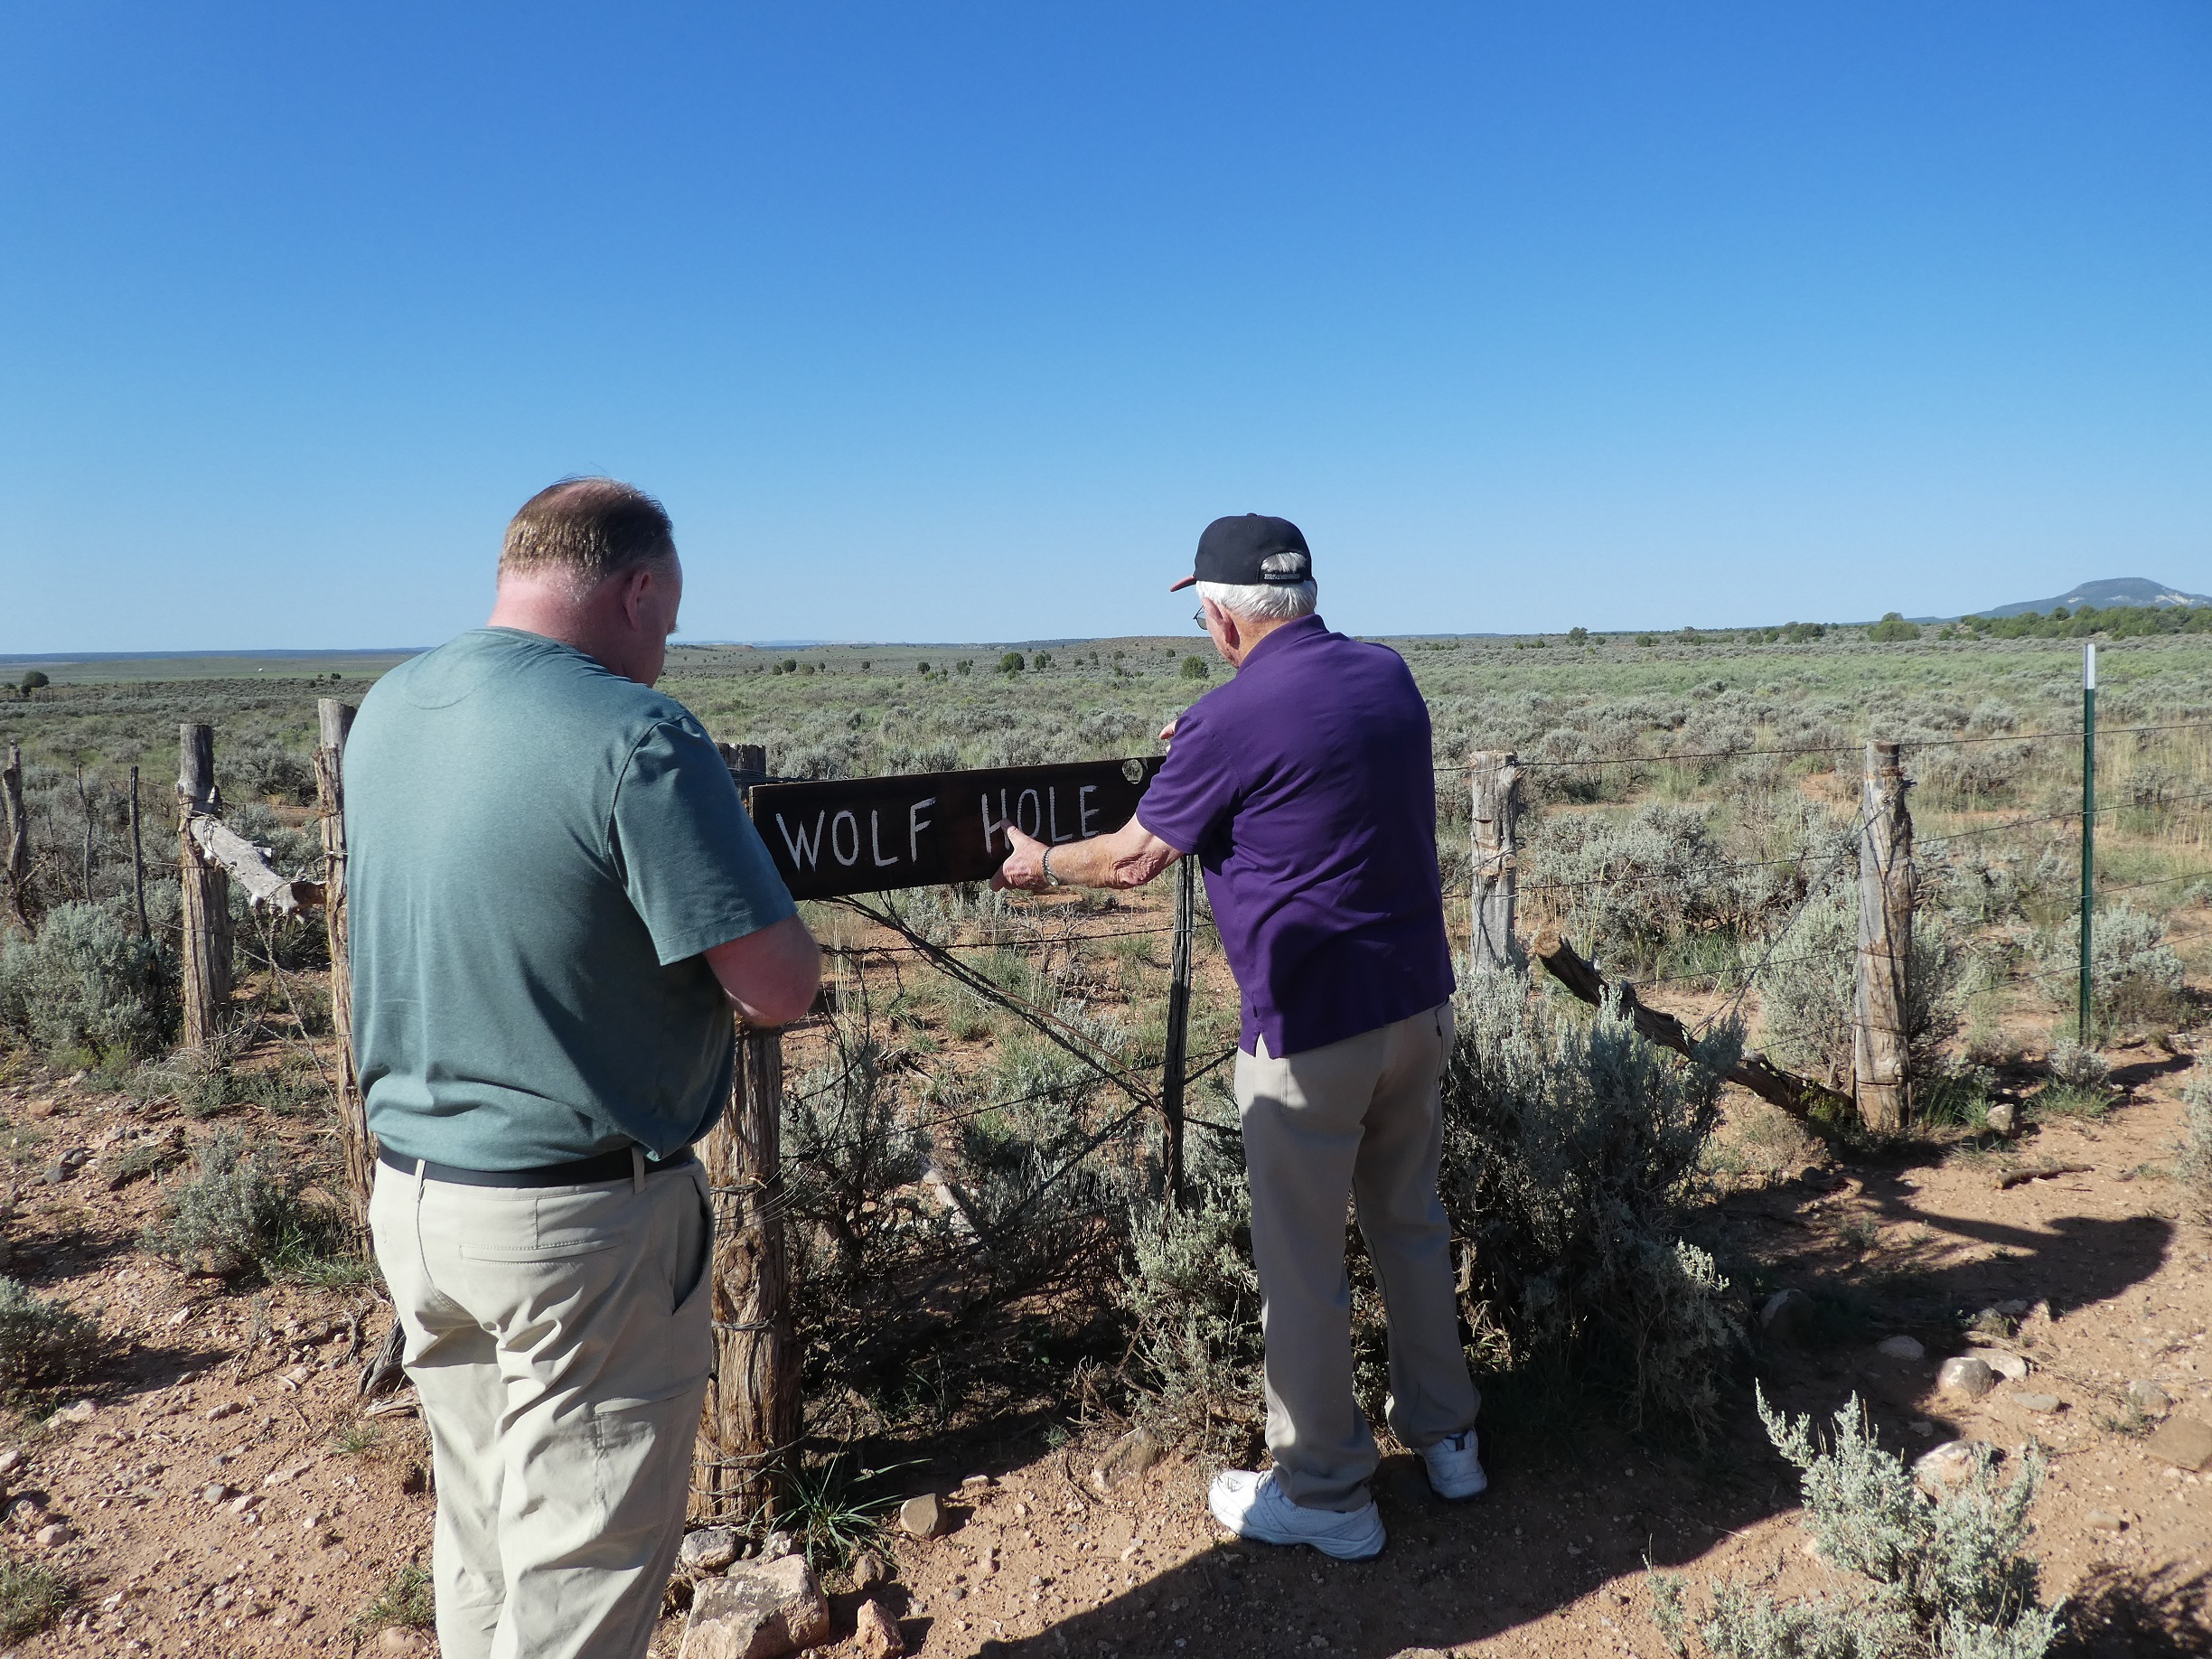 Two men putting up a sign at Wolf Hole on the Arizona Strip